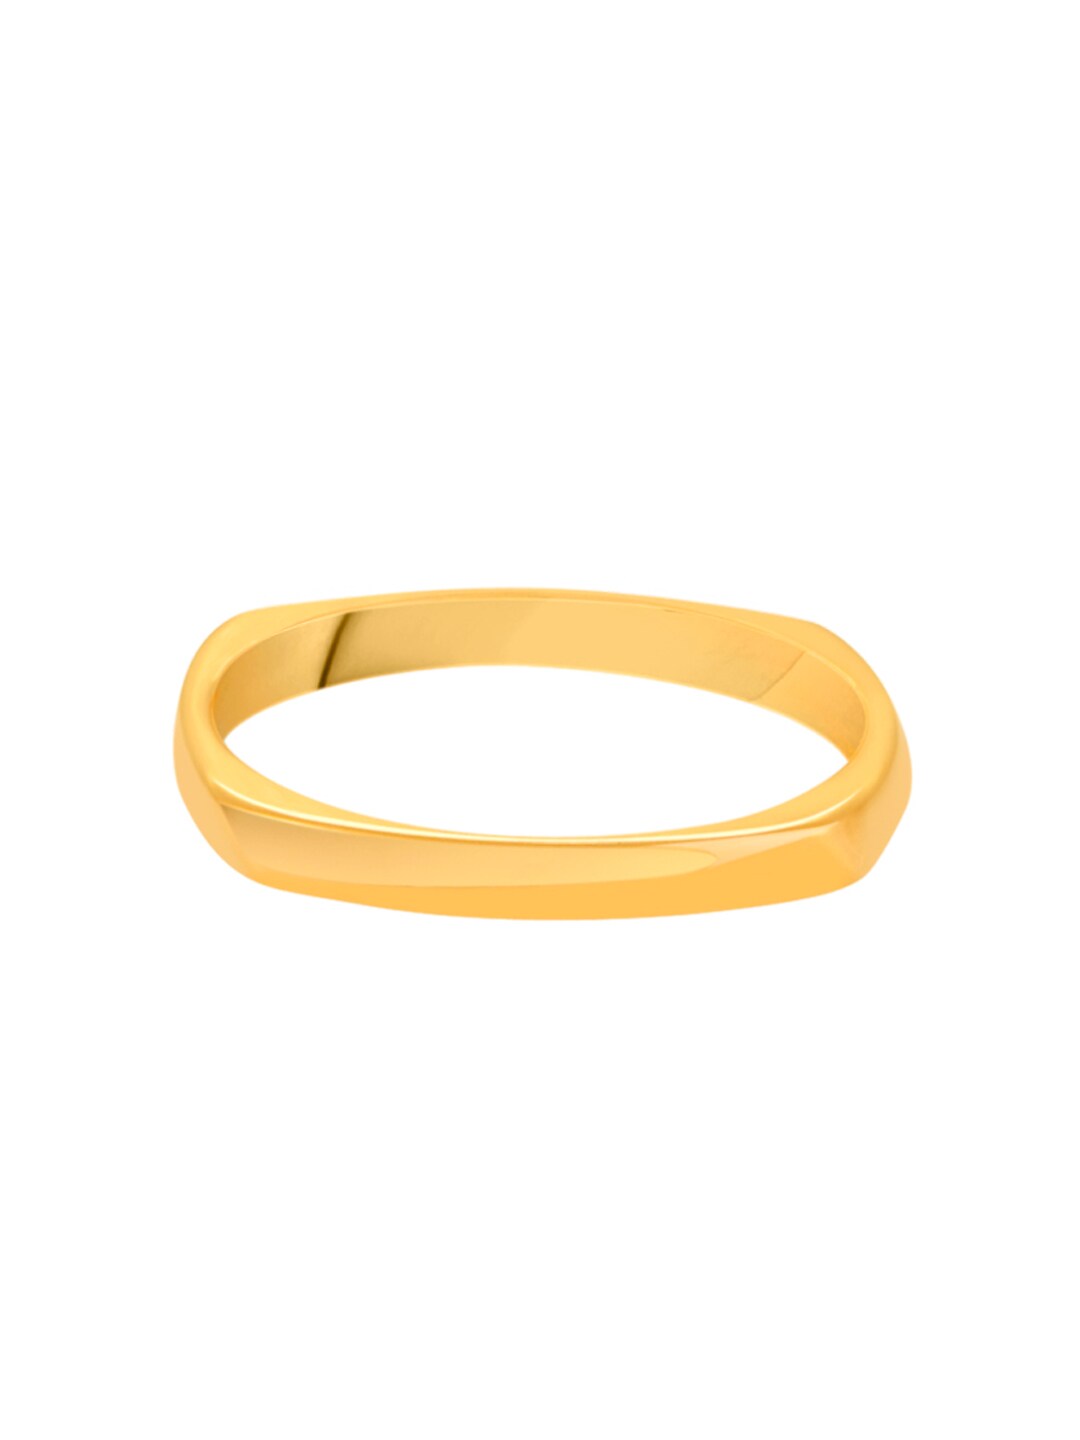 TALISMAN Women Gold-Plated Handcrafted Ring Price in India